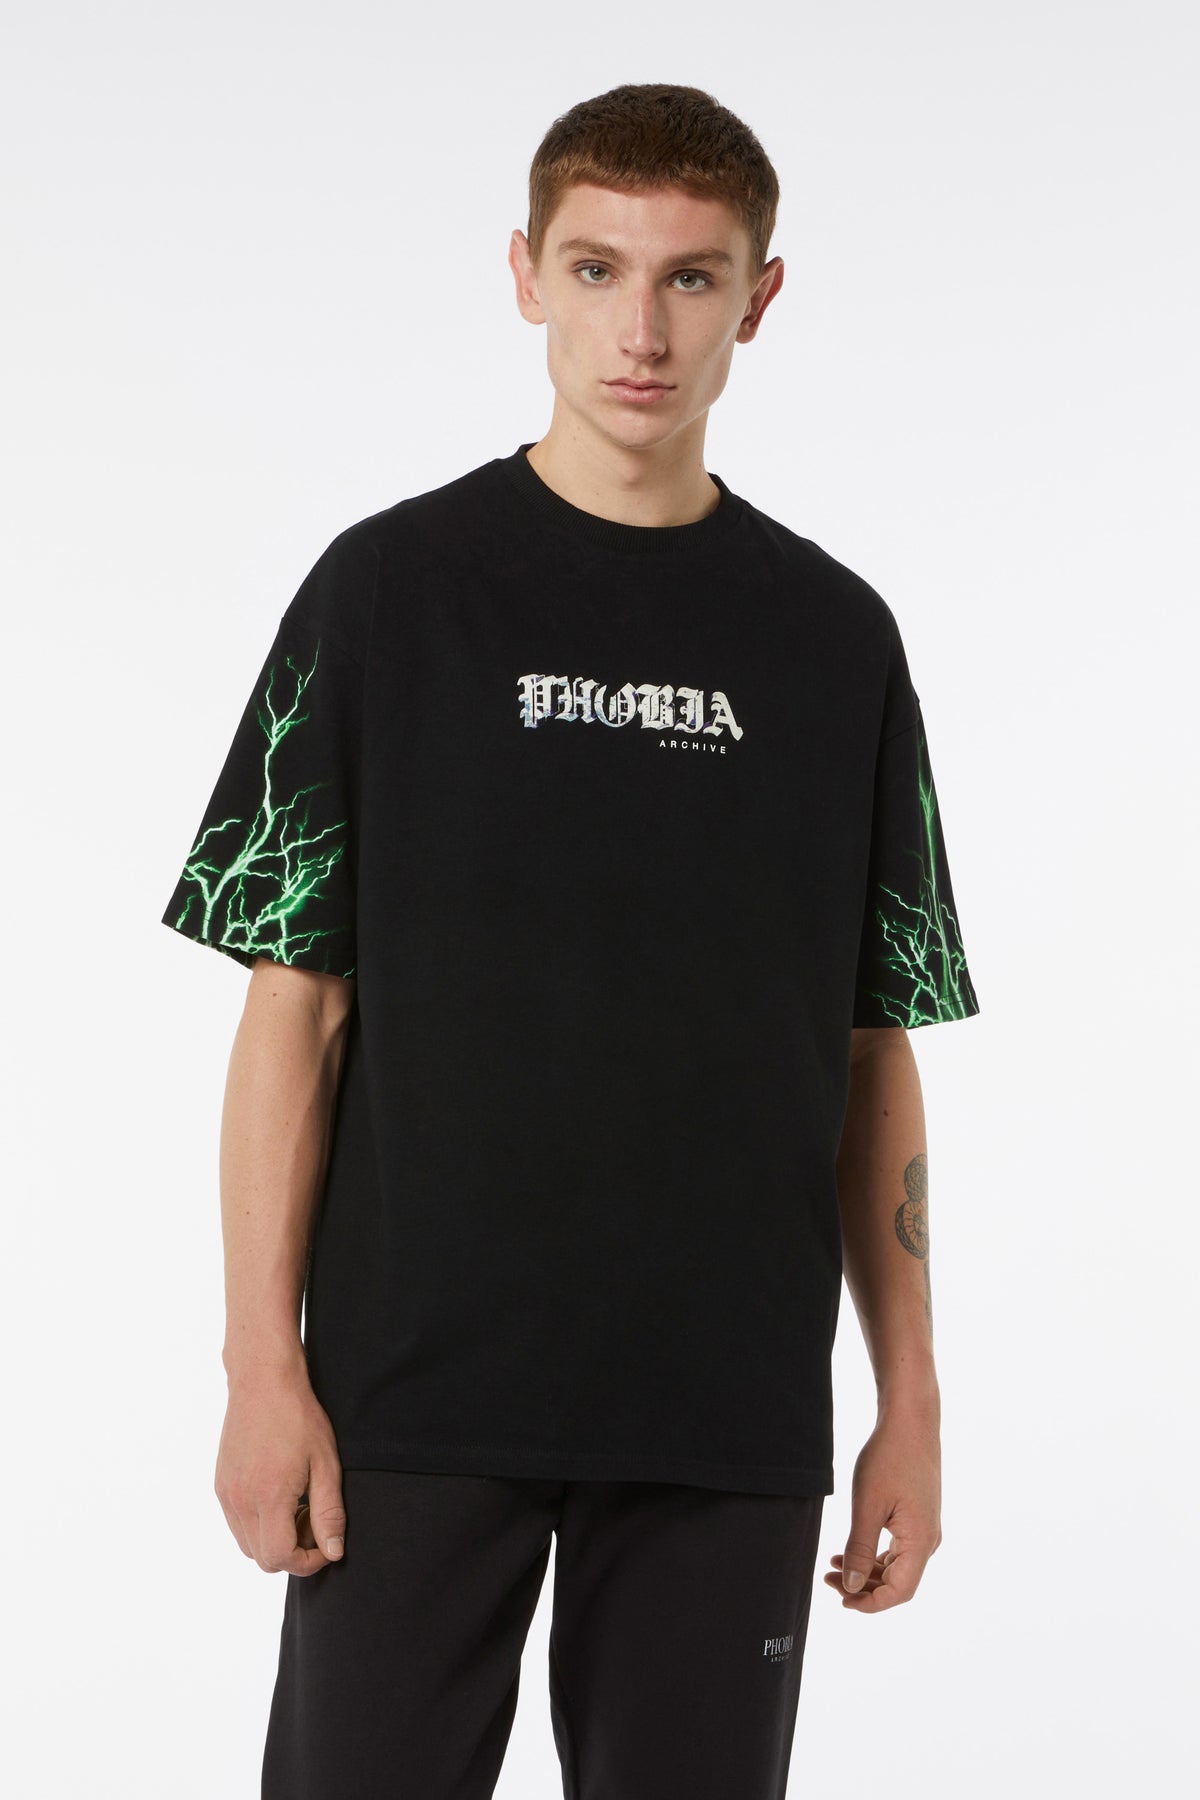 PHOBIA Black T-Shirt with Green lightning on sleeves